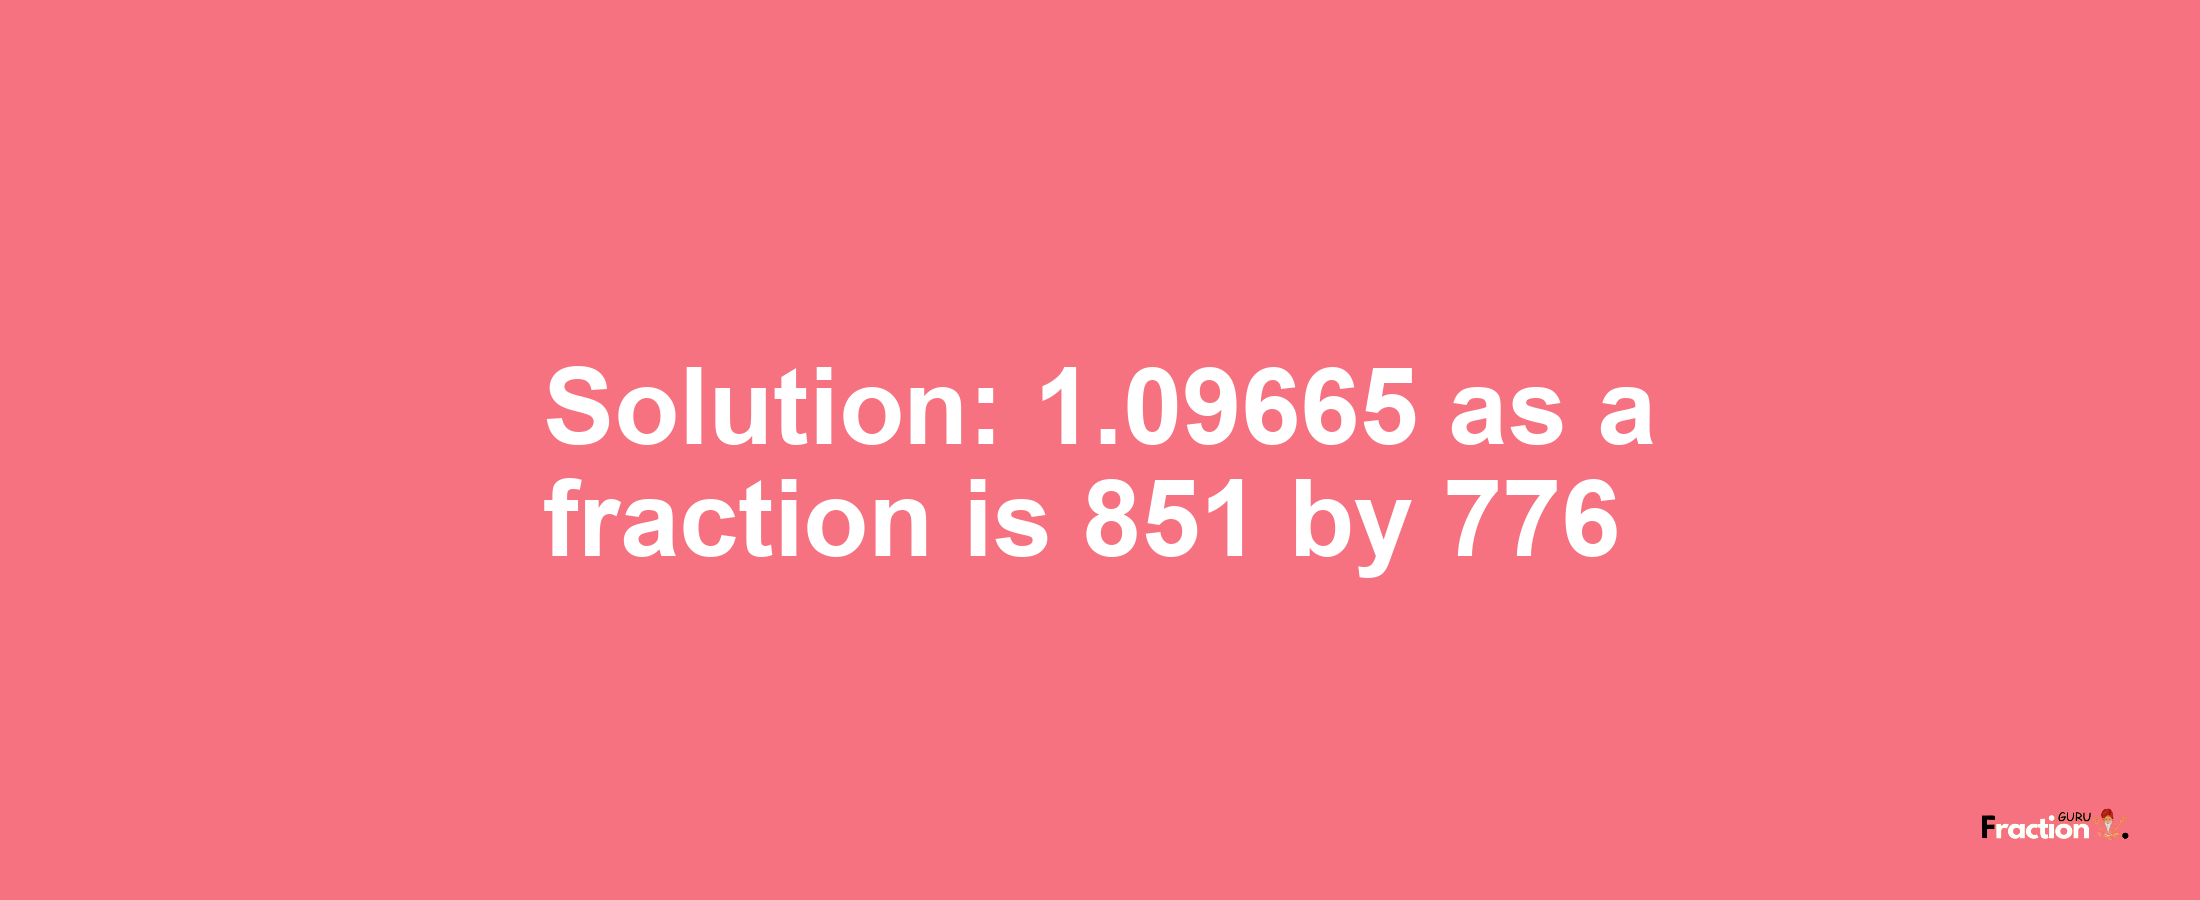 Solution:1.09665 as a fraction is 851/776